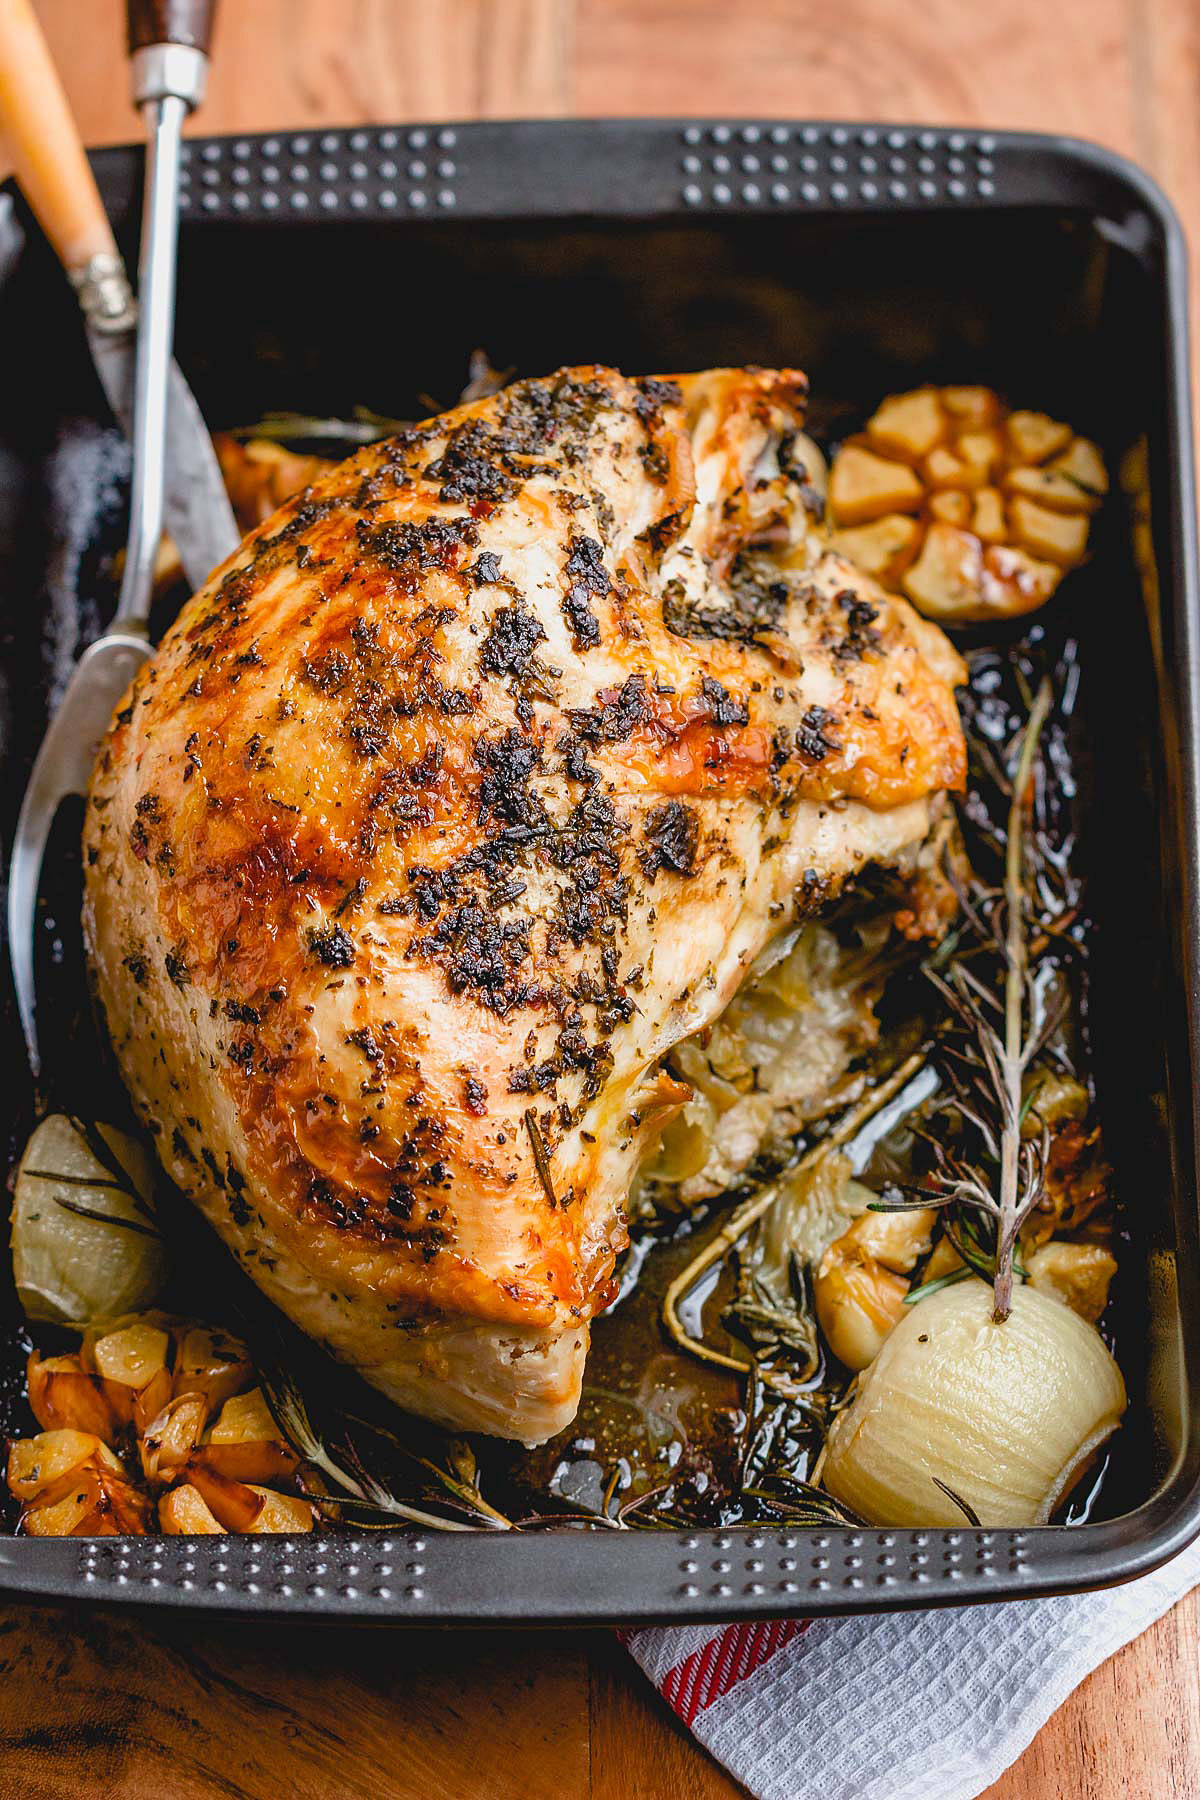 Roasted Turkey Breast Recipe with Garlic Herb Butter – How to Roast a